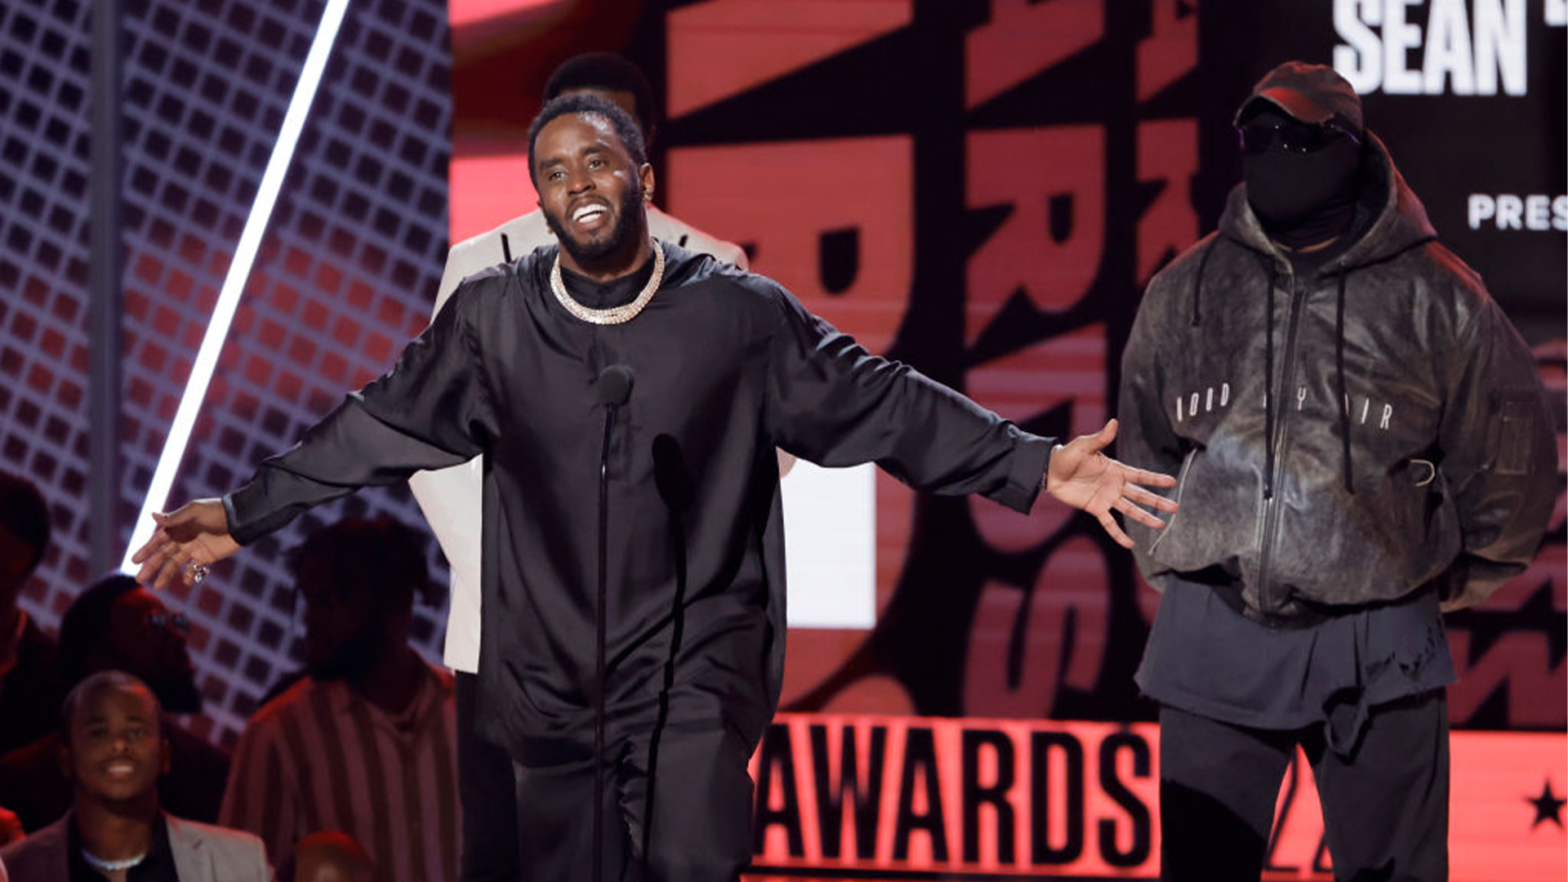 Diddy Pledges $1M To HBCUs Howard University And Jackson State University At The 2022 BET Awards